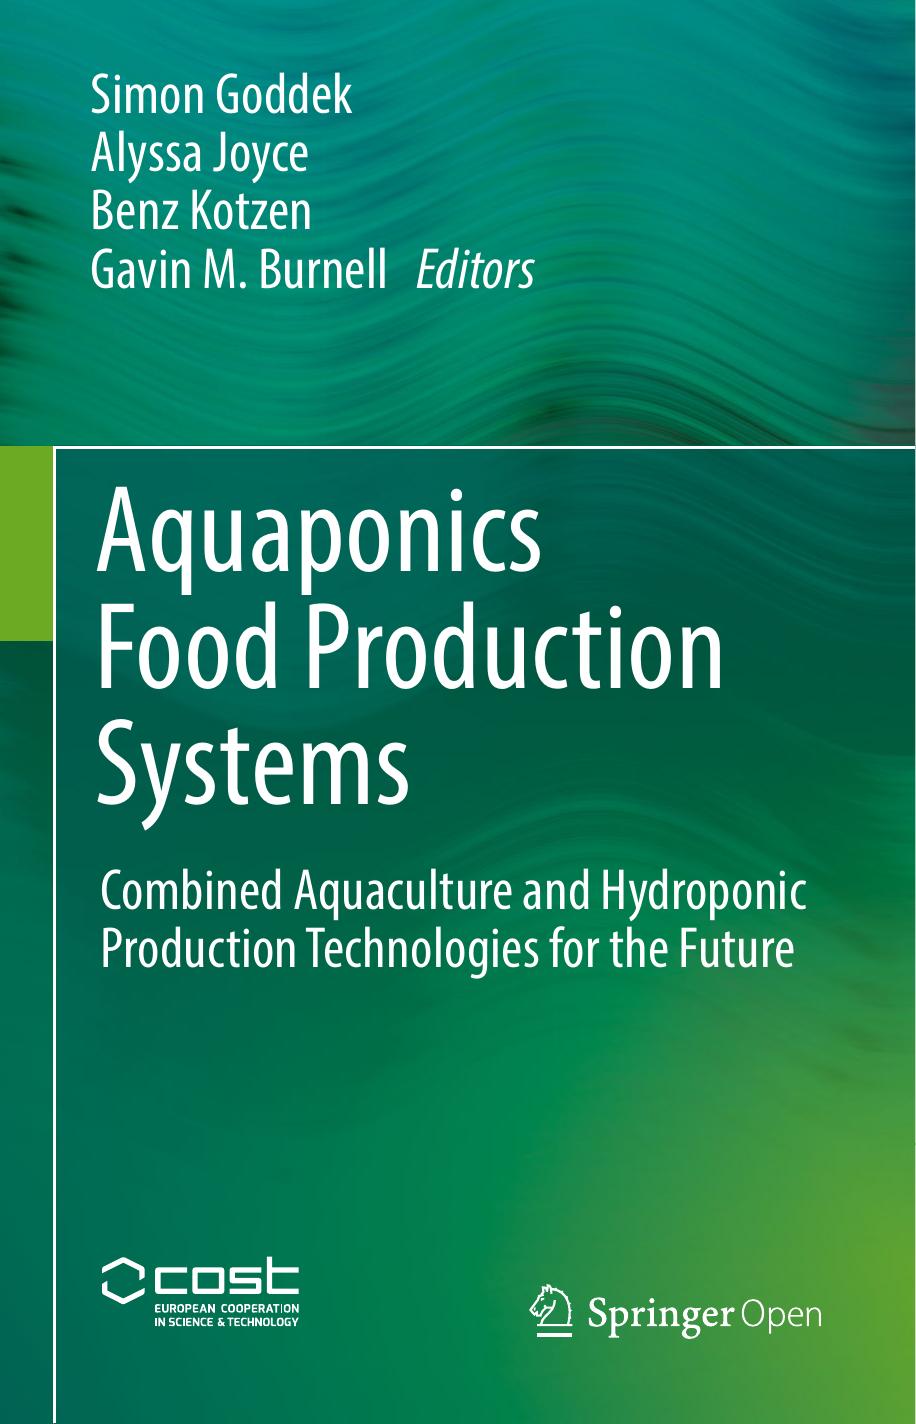 Aquaponics Food Production Systems  Combined Aquaculture and Hydroponic Production Technologies for the Future-Springer International Publis 2019